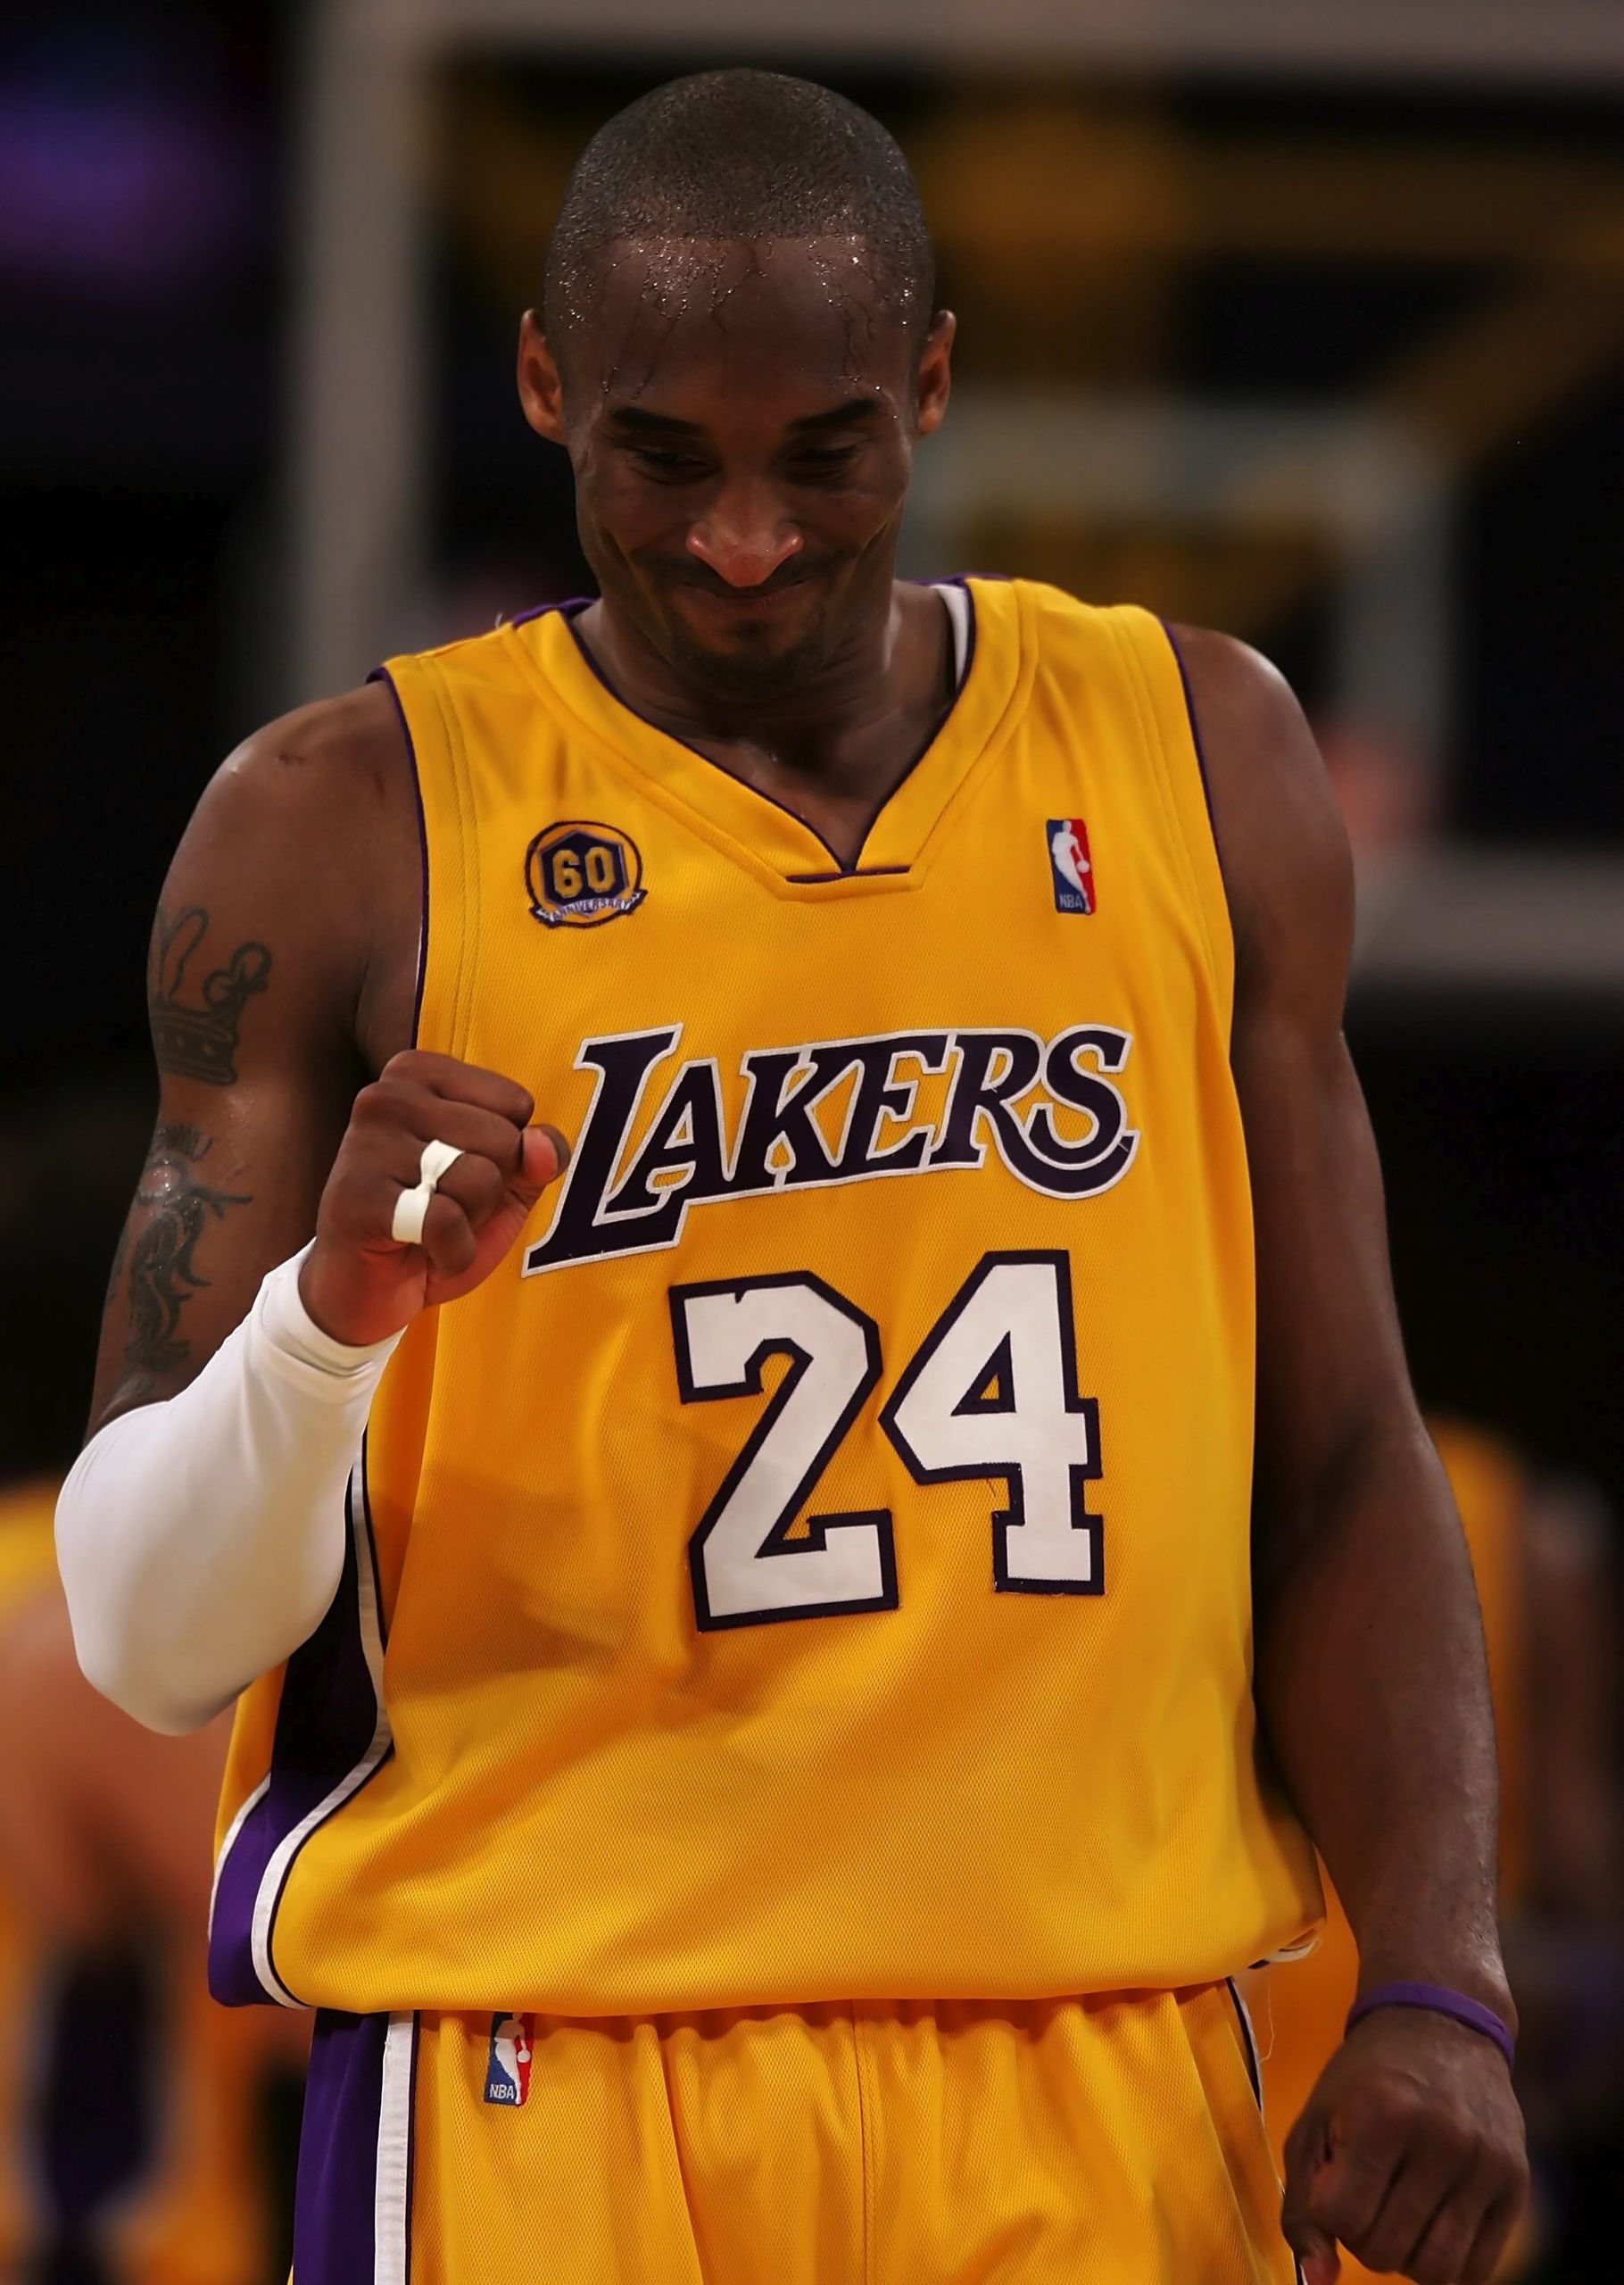 kobe bryant arrested for sexual assault